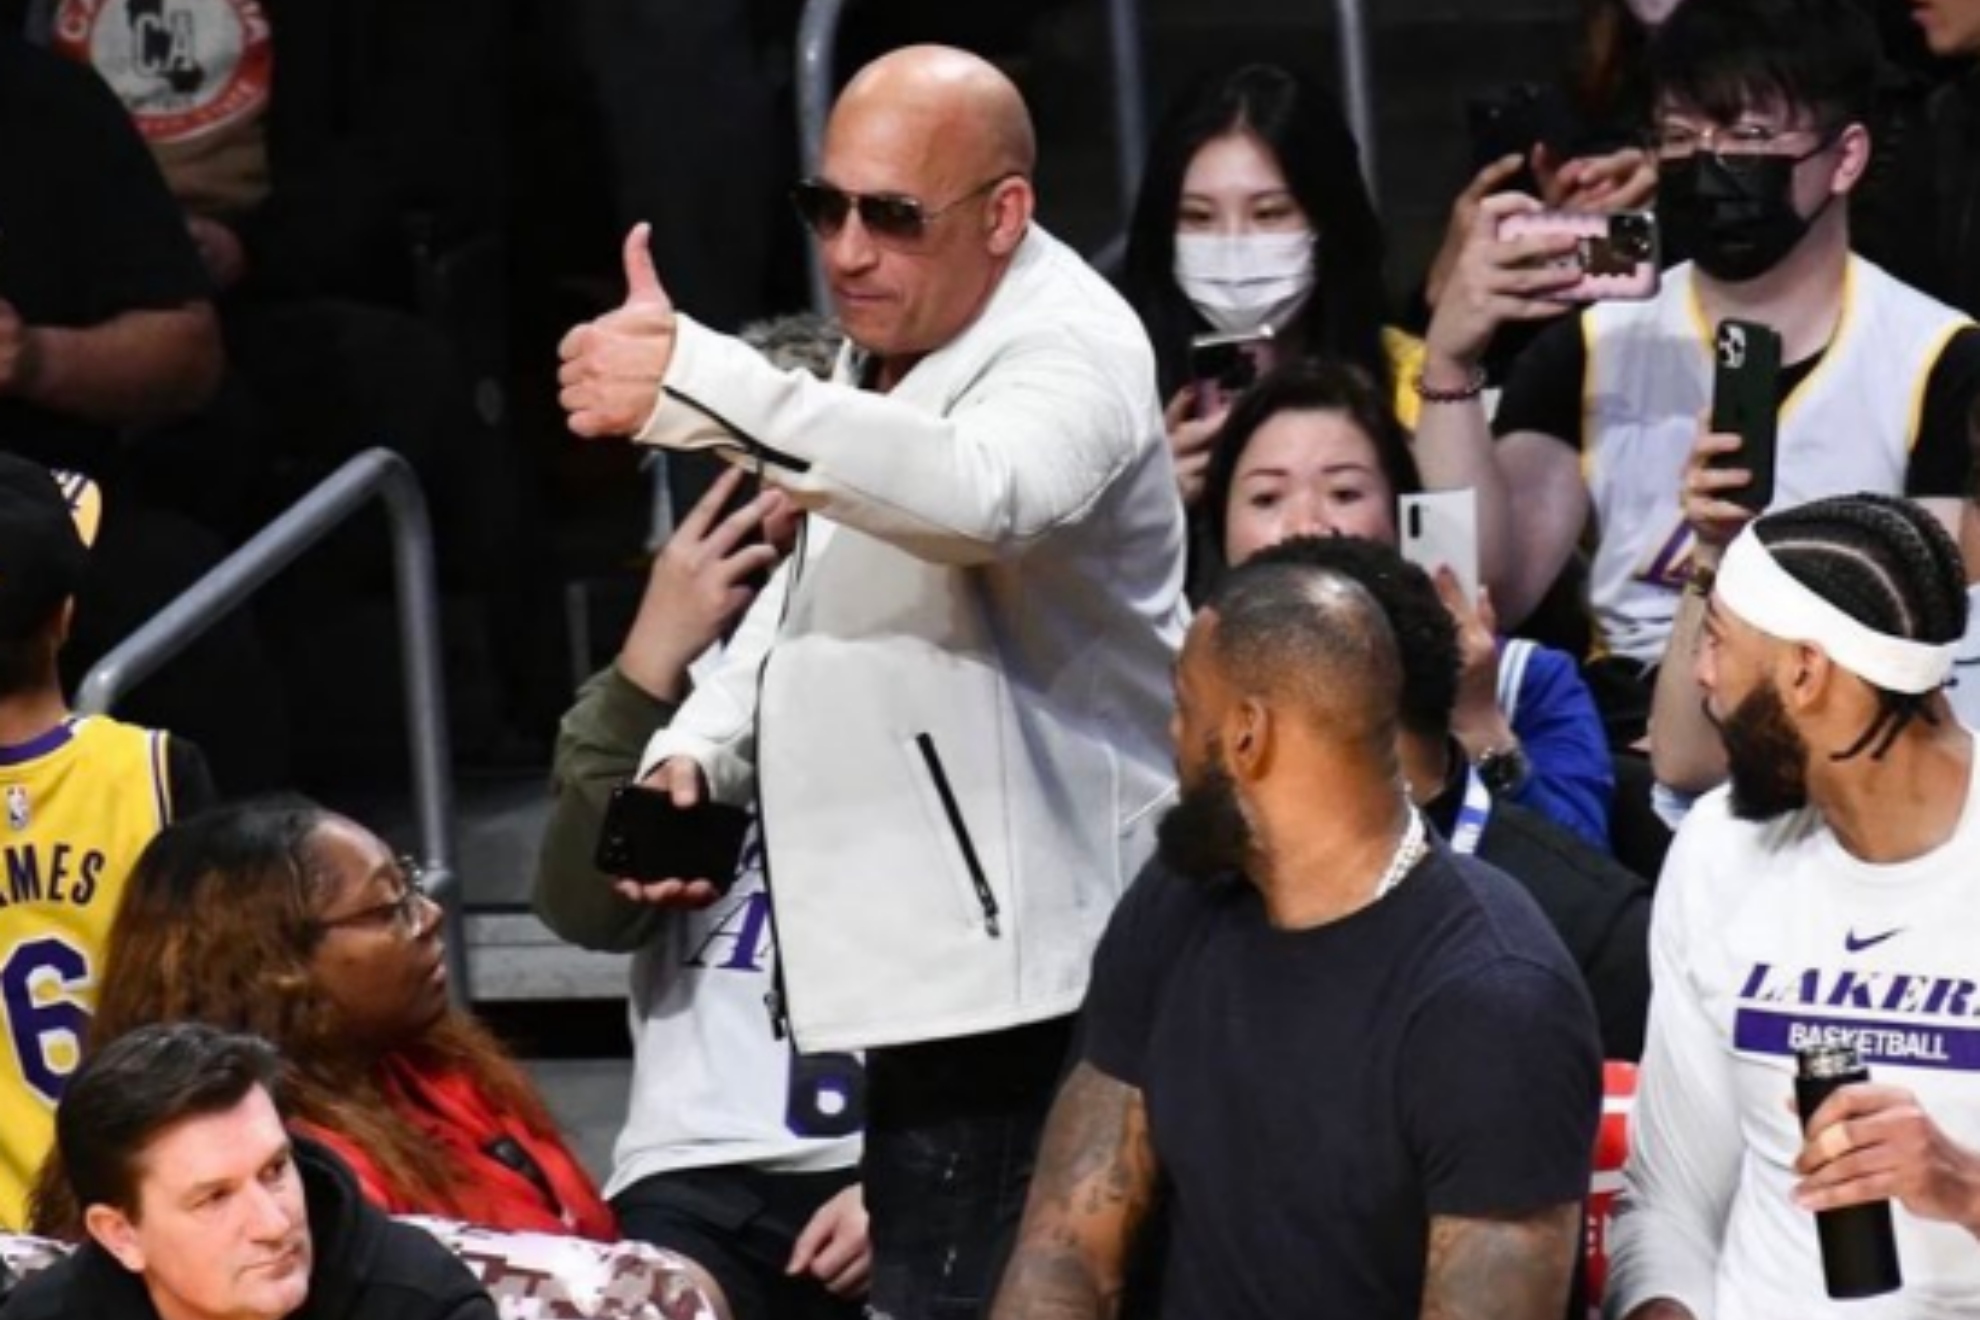 Vin Diesel takes a stand and demands Brittney Griner be released from gulag-style prison before Chrismas